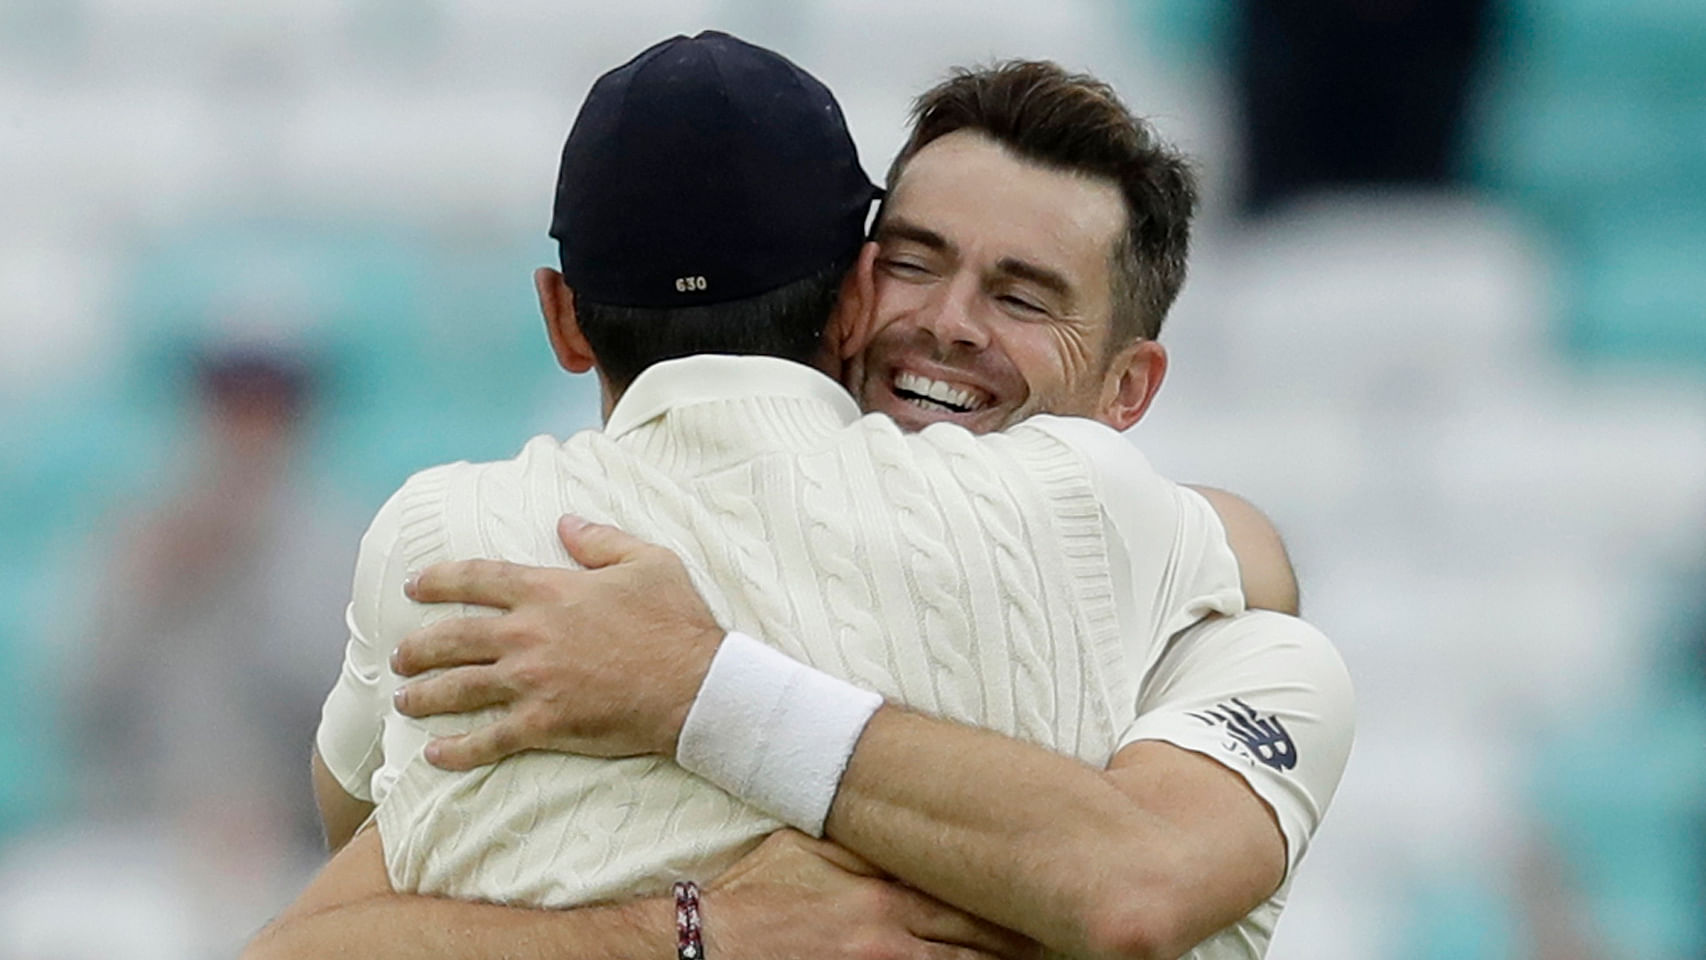 James Anderson choked up while talking about Alastair Cook in a post-match interview at The Oval.